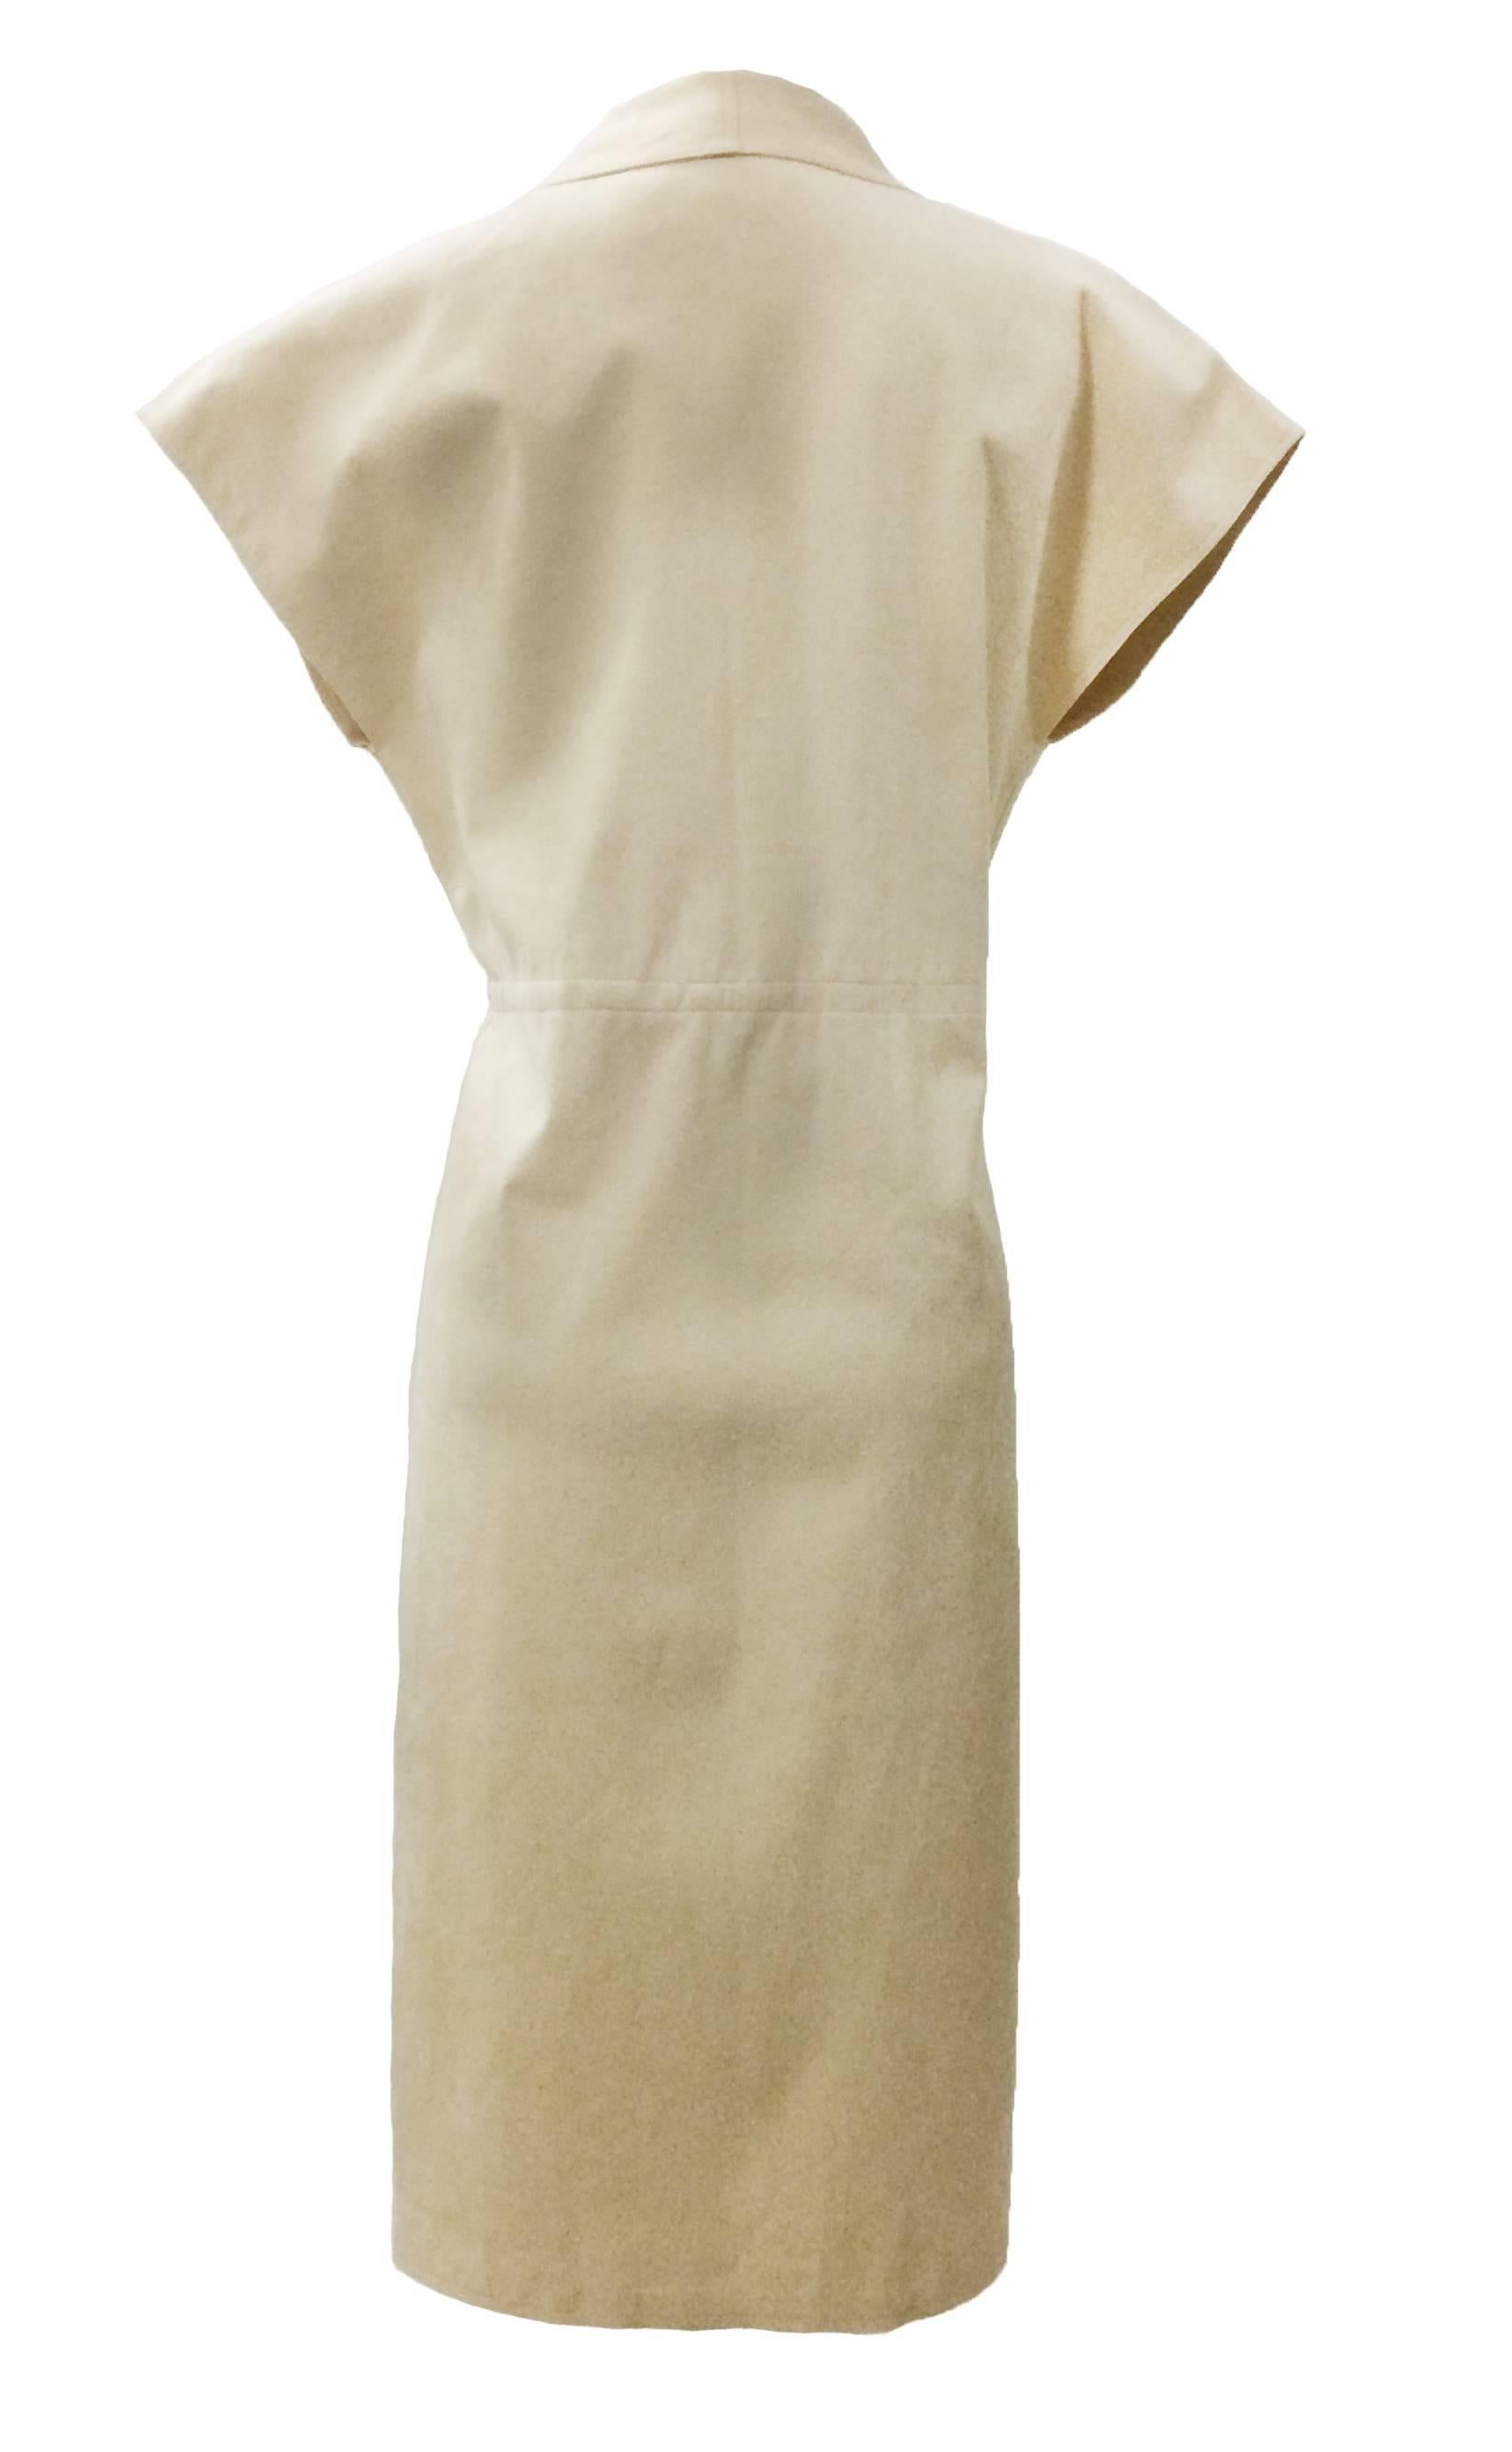 Halston 70s cream ultrasuede wrap dress. Short sleeve, elastic at waist. Fastens at front with two hooks.

No fabric content label.

No size label, fits like L/XL.
Bust 40